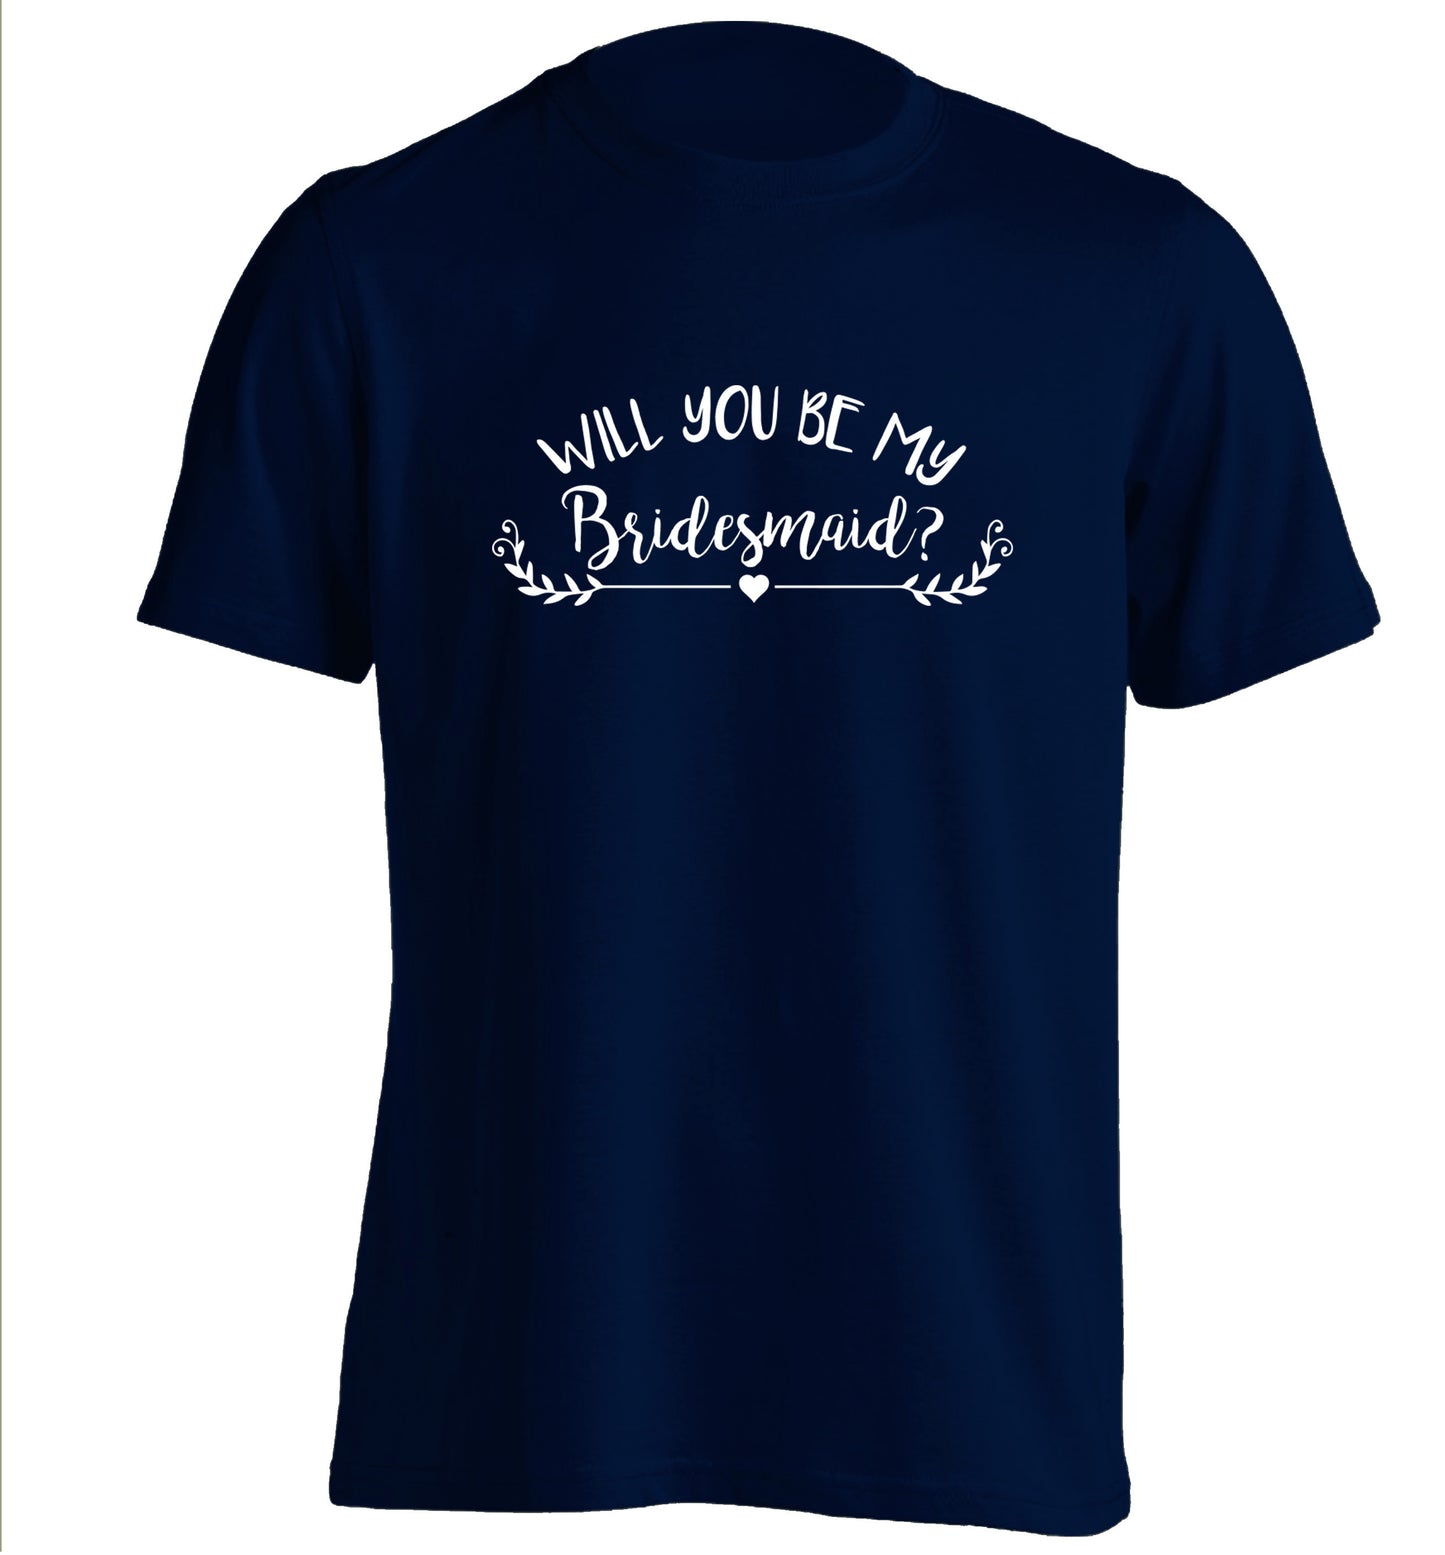 Will you be my bridesmaid? adults unisex navy Tshirt 2XL